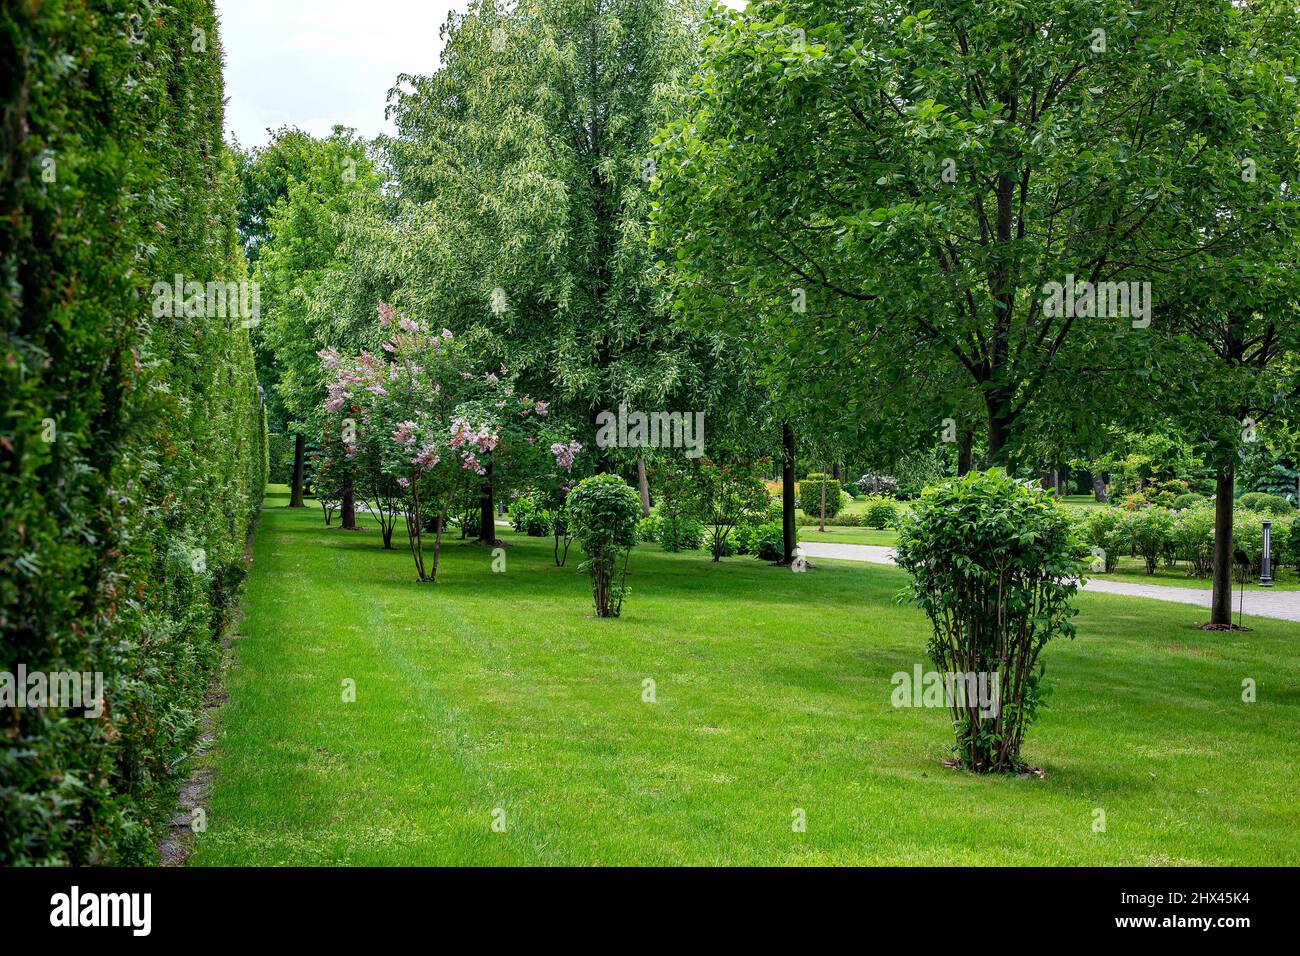 high hedge wall of evergreen arborvitae thuja near of green meadow turf lawn with a deciduous bushes and trees landscape on backyard scenic place, nob Stock Photo